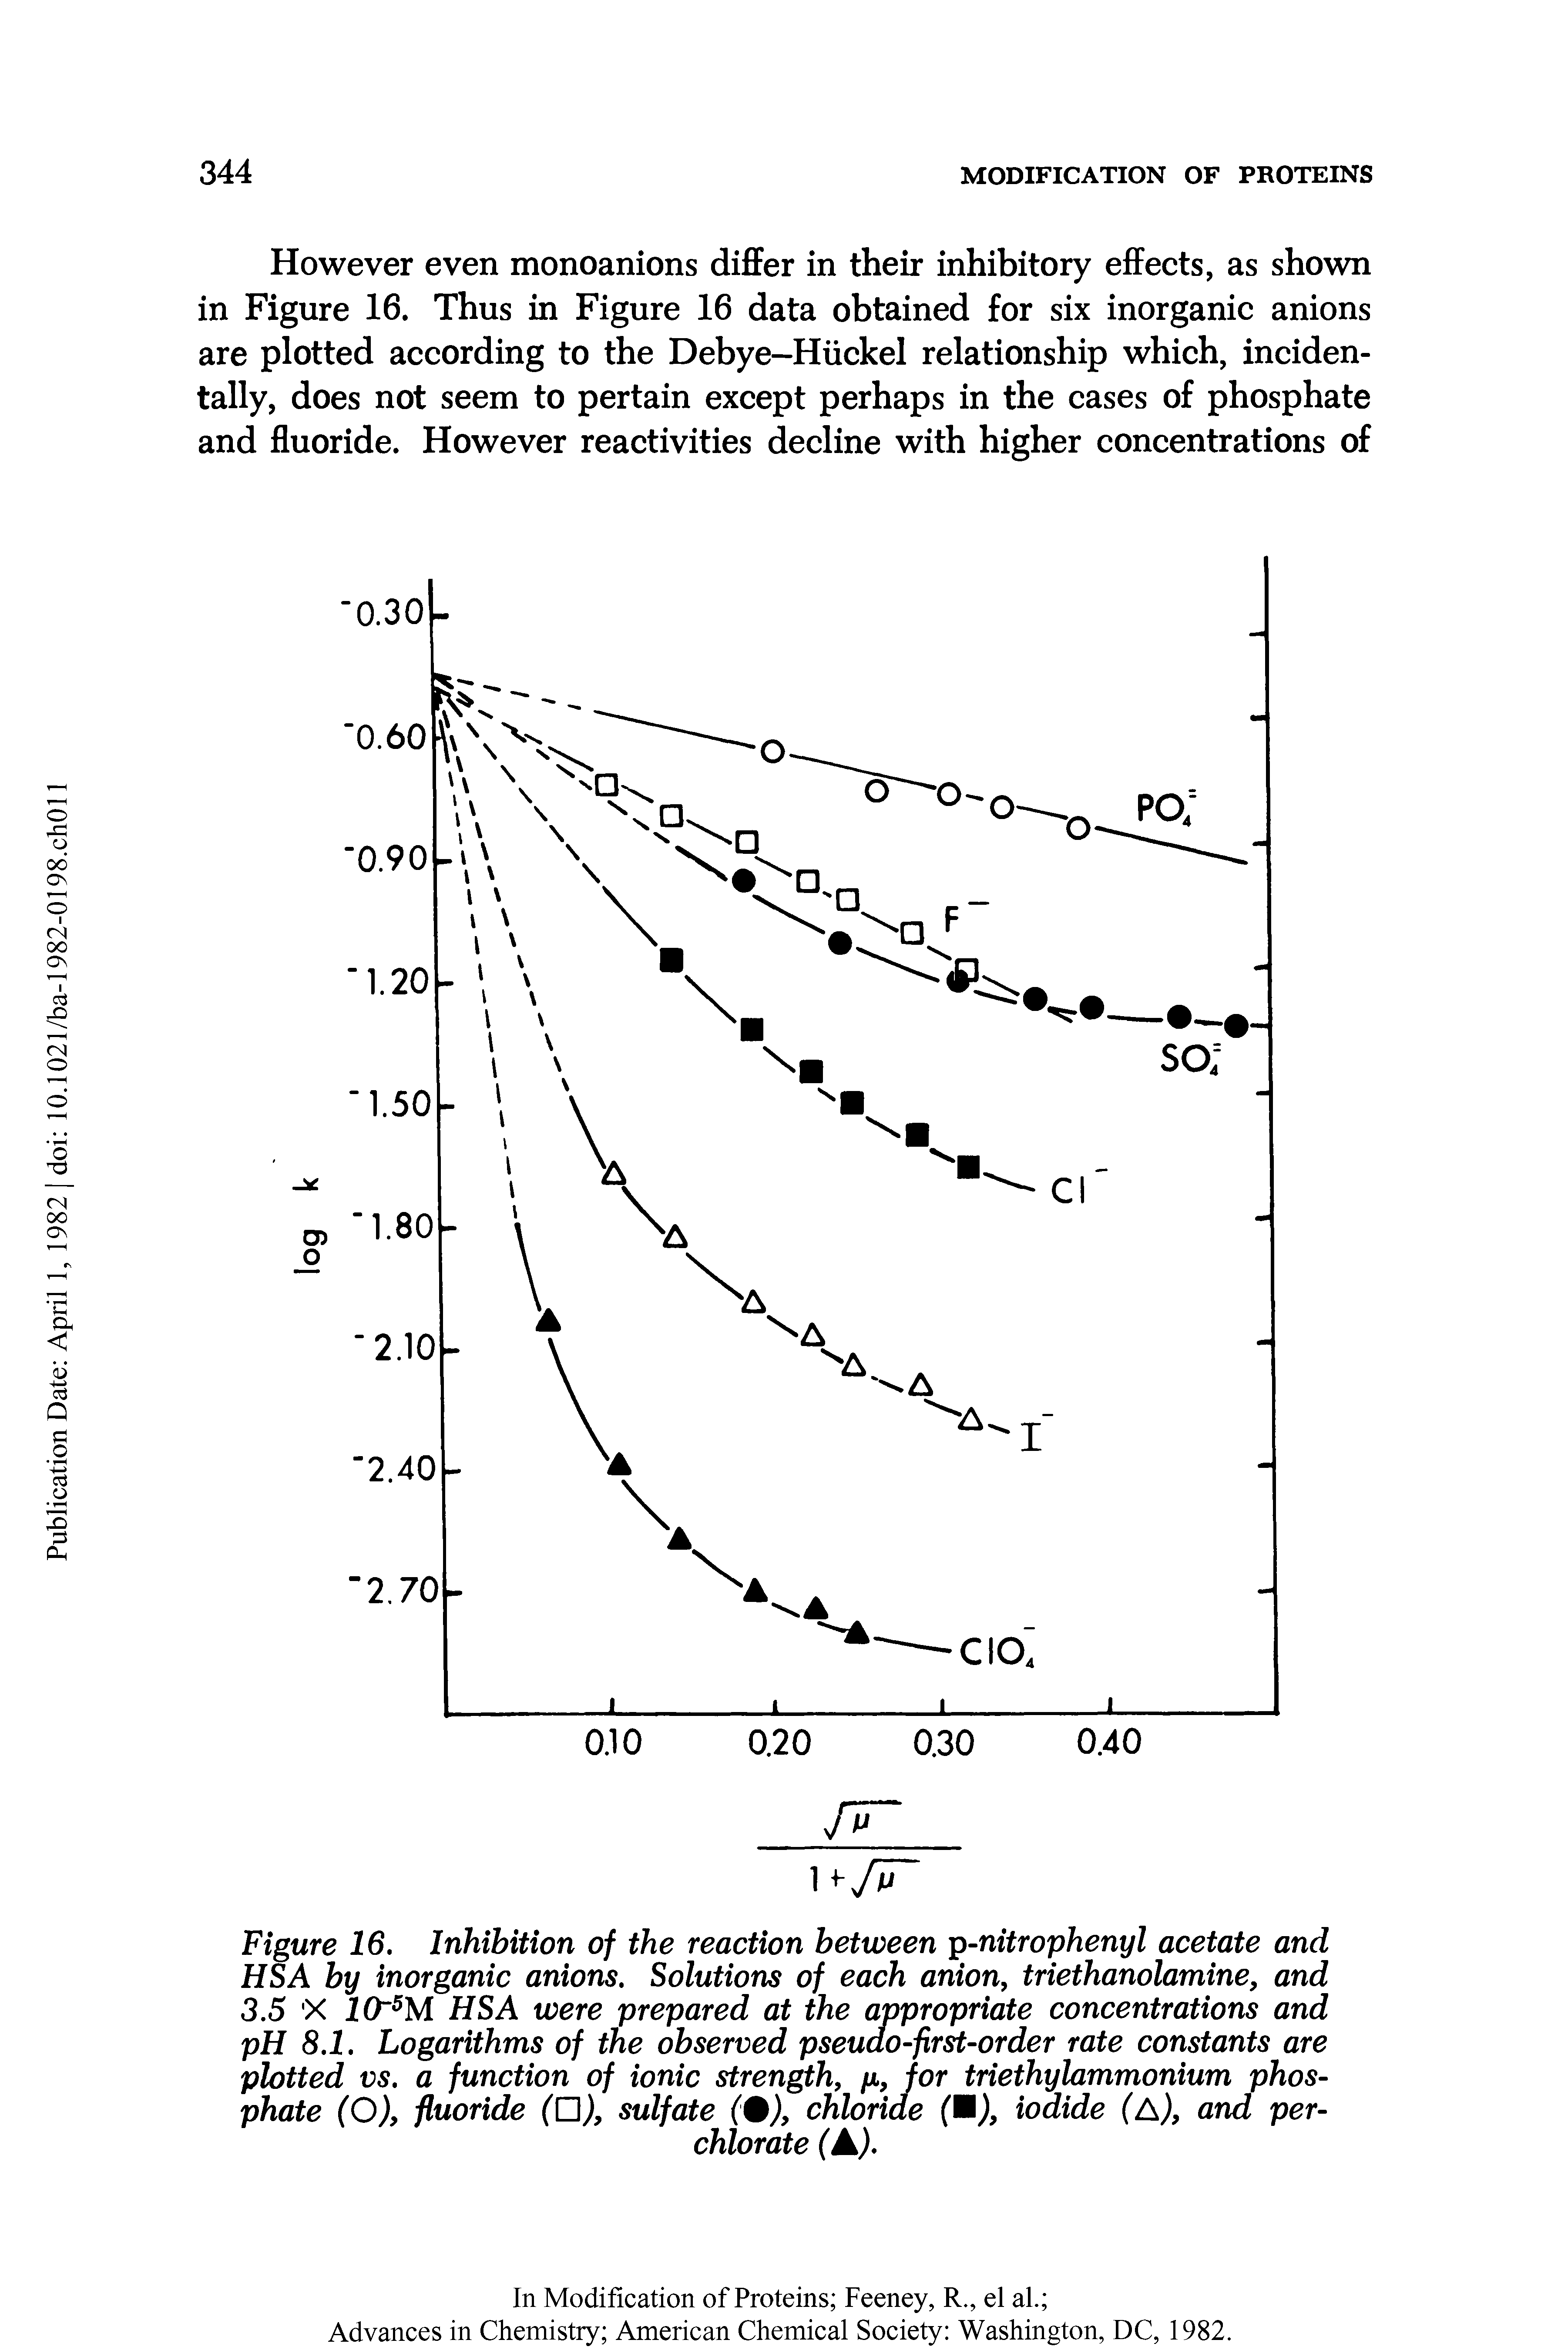 Figure 16. Inhibition of the reaction between p-nitrophenyl acetate and HSA by inorganic anions. Solutions of each anion, triethanolamine, and 3.5 X 10 5M HSA were prepared at the appropriate concentrations and pH 8.1. Logarithms of the observed pseudo-first-order rate constants are plotted vs. a function of ionic strength, jjl, for triethylammonium phosphate (O), fluoride (D), sulfate (%), chloride (M), iodide (A), and perchlorate ( A).